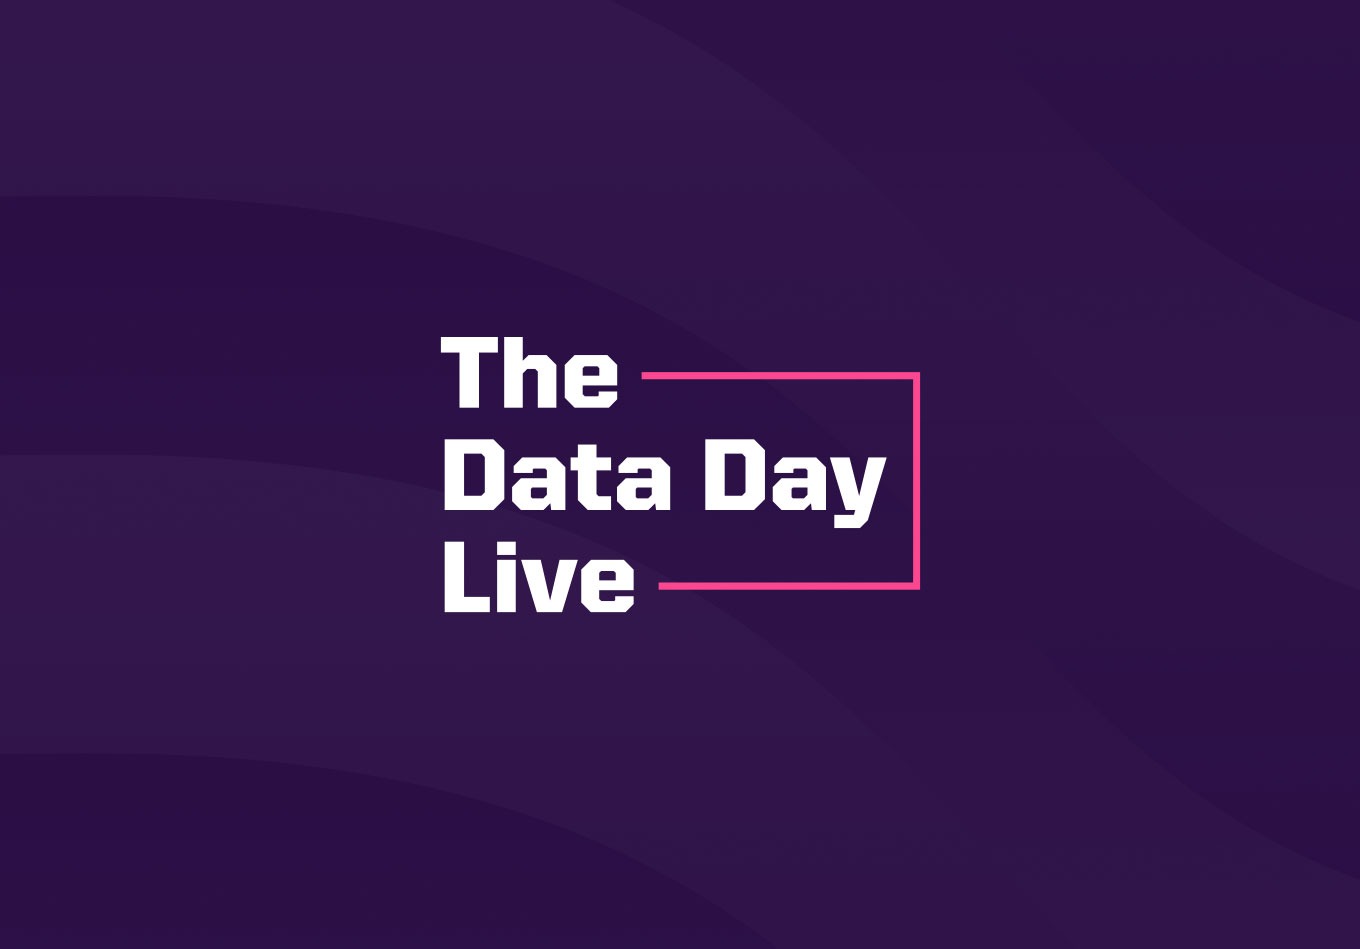 Listen to our World Cup Preview Podcast Series ‘The Data Day Live’